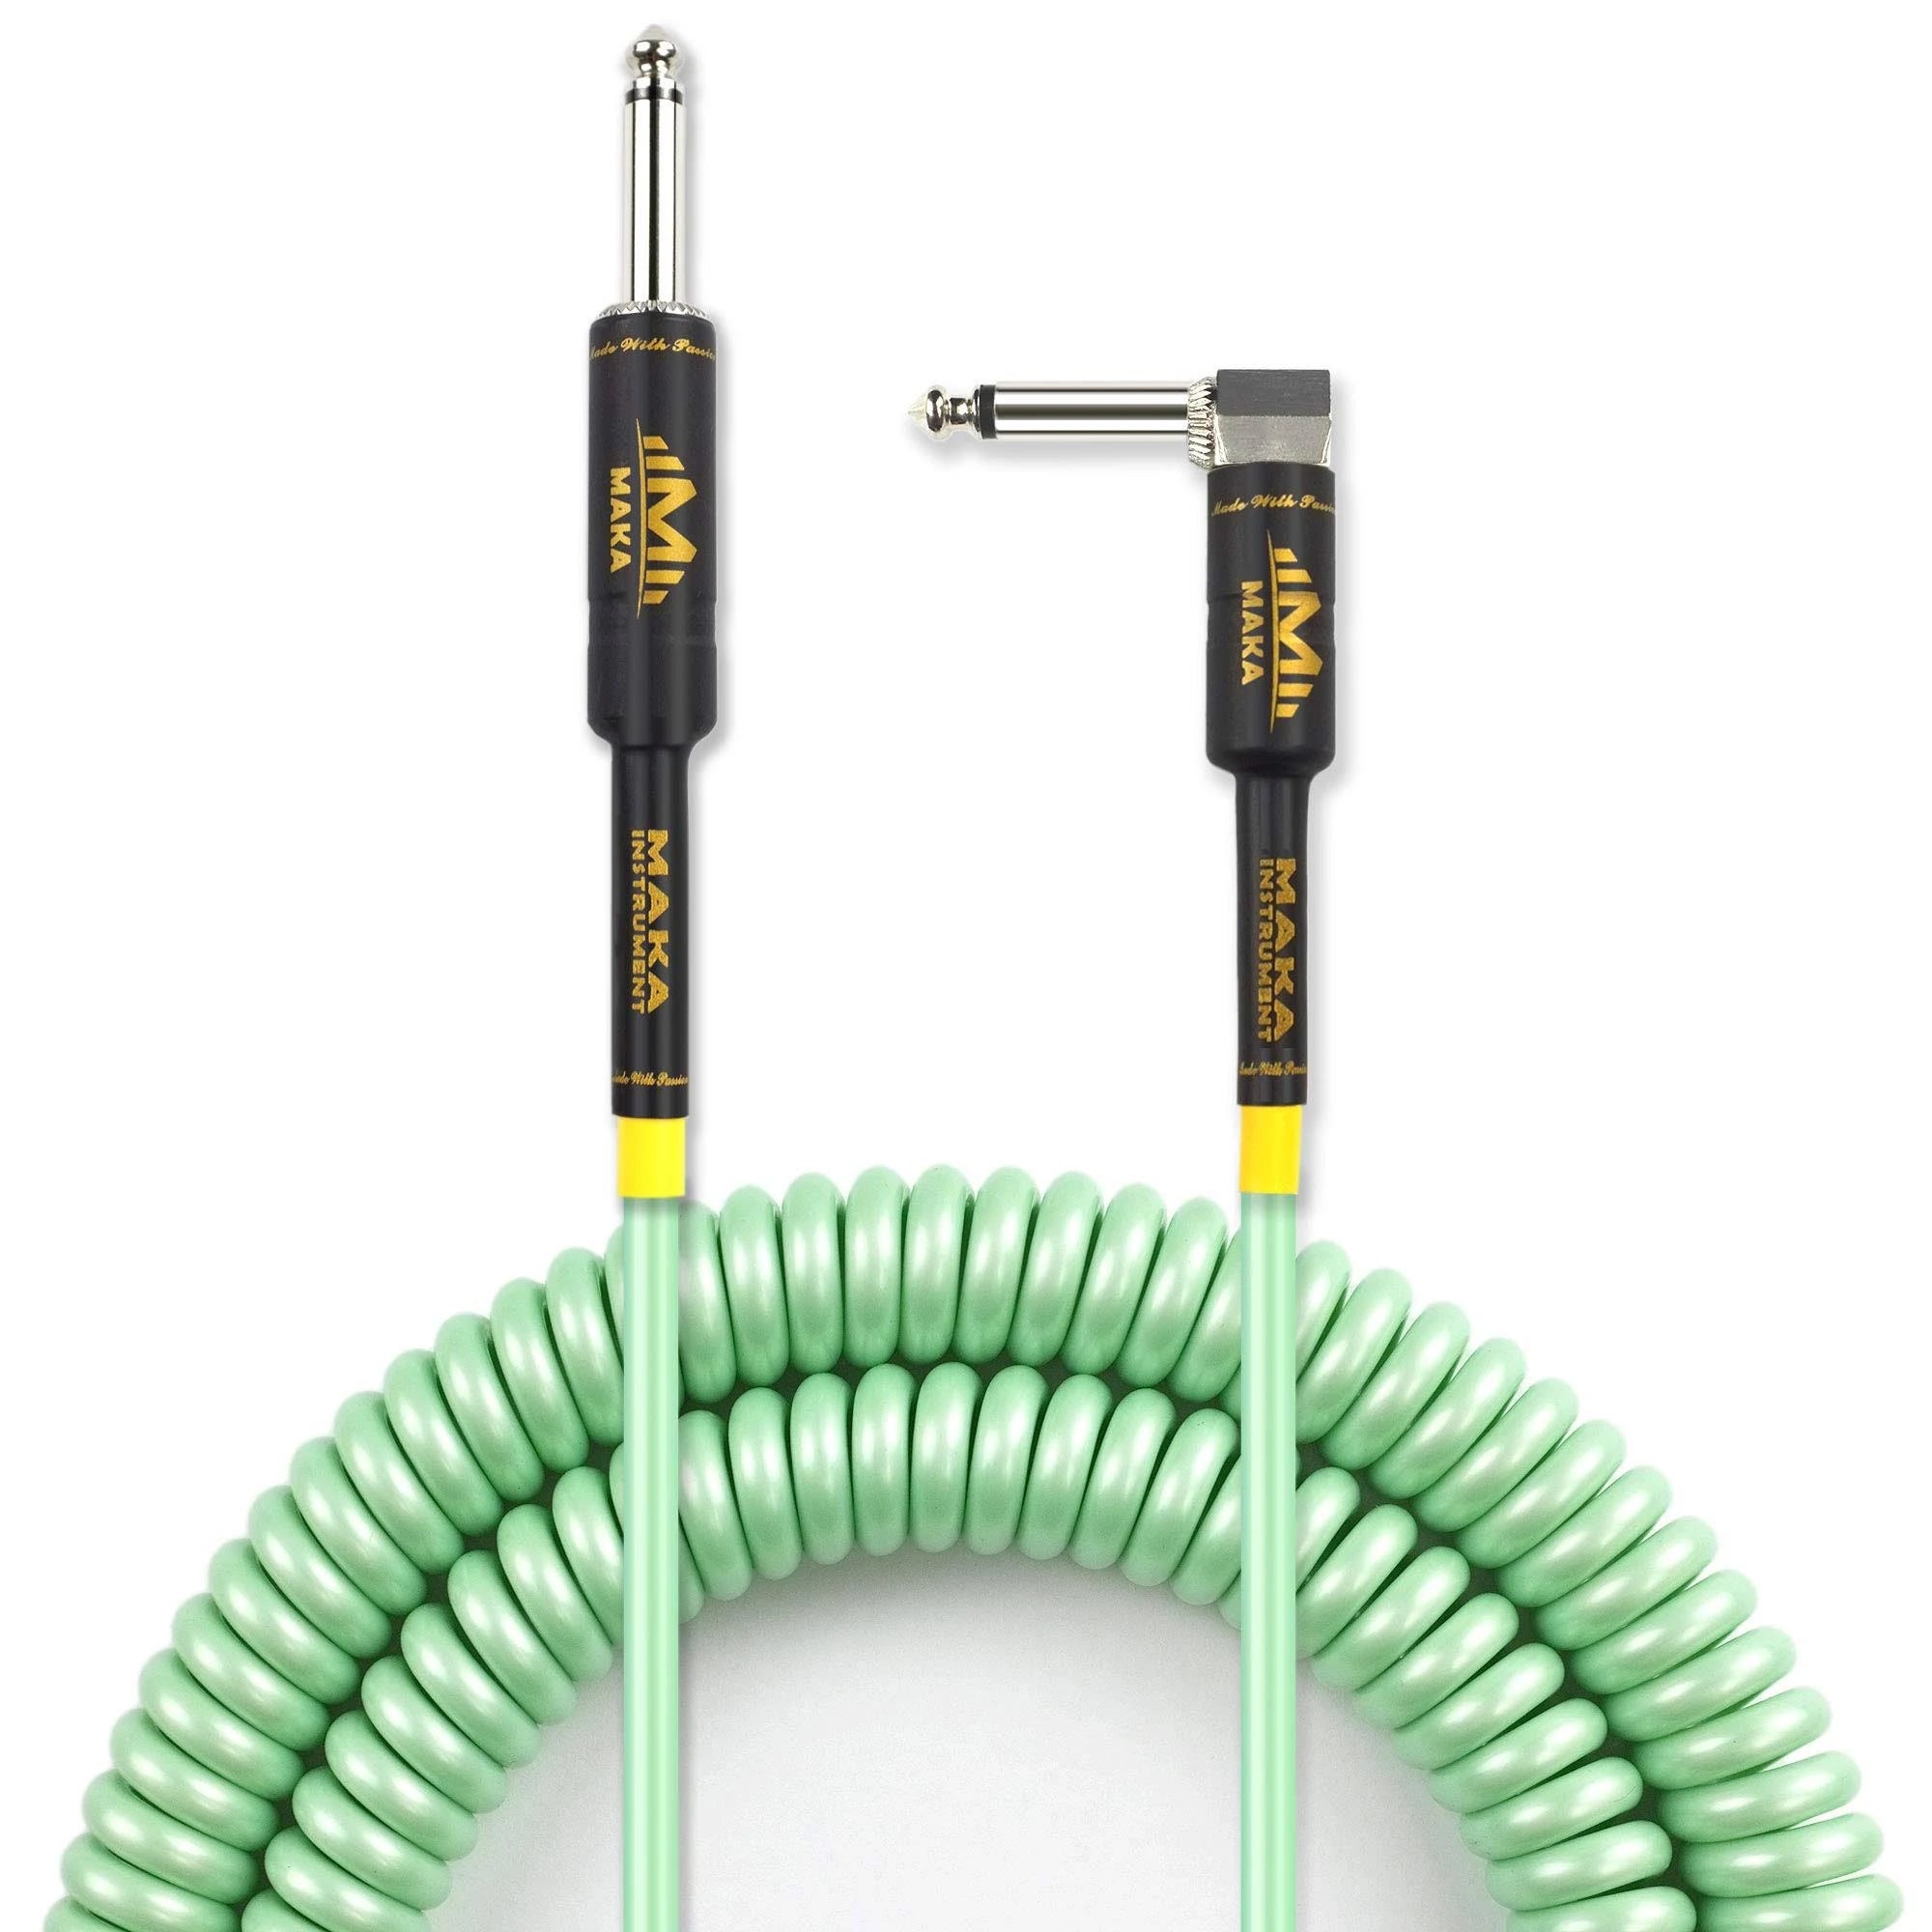 Exclusive MAKA Premium Guitar Coil Cable with Surf Green Elastomeric PVC Outer Jacket | Image